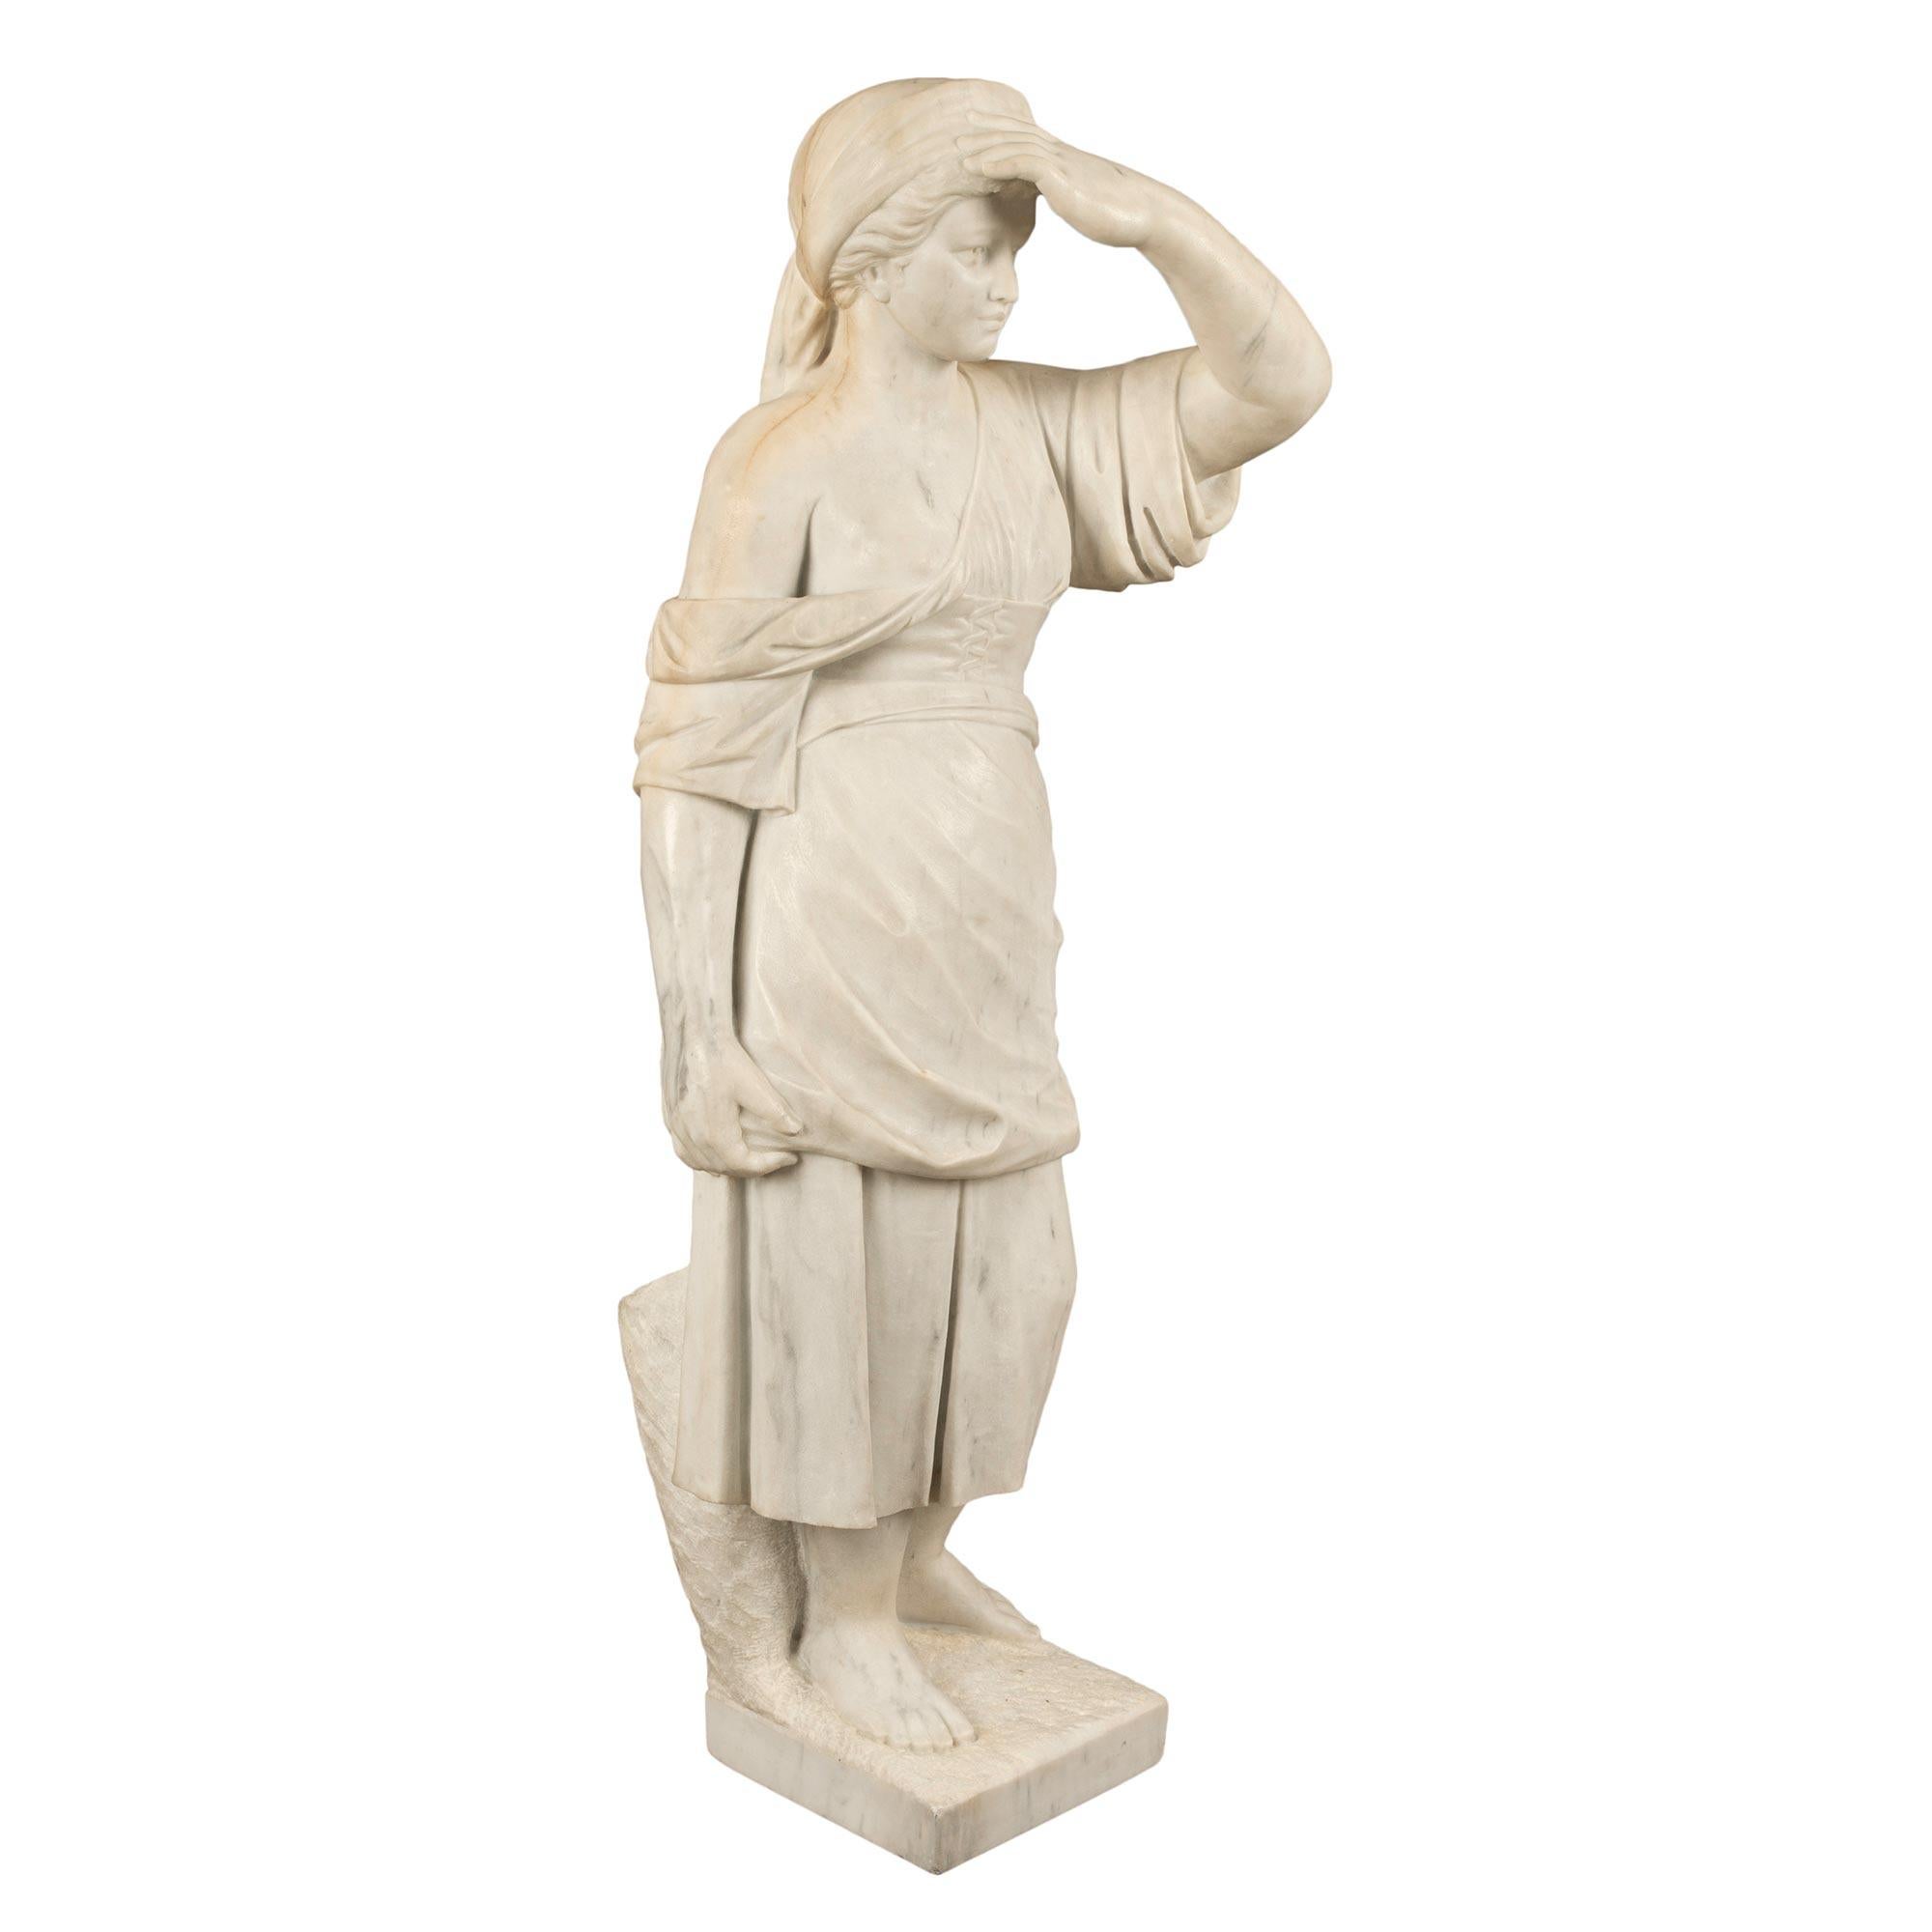 A beautiful Italian 19th century white Carrara marble statue of a young lady. The statue is raised by a square base with a tree stump at the back. The lovely young lady is wearing a wonderfully sculpted dress falling off one shoulder. She holds her